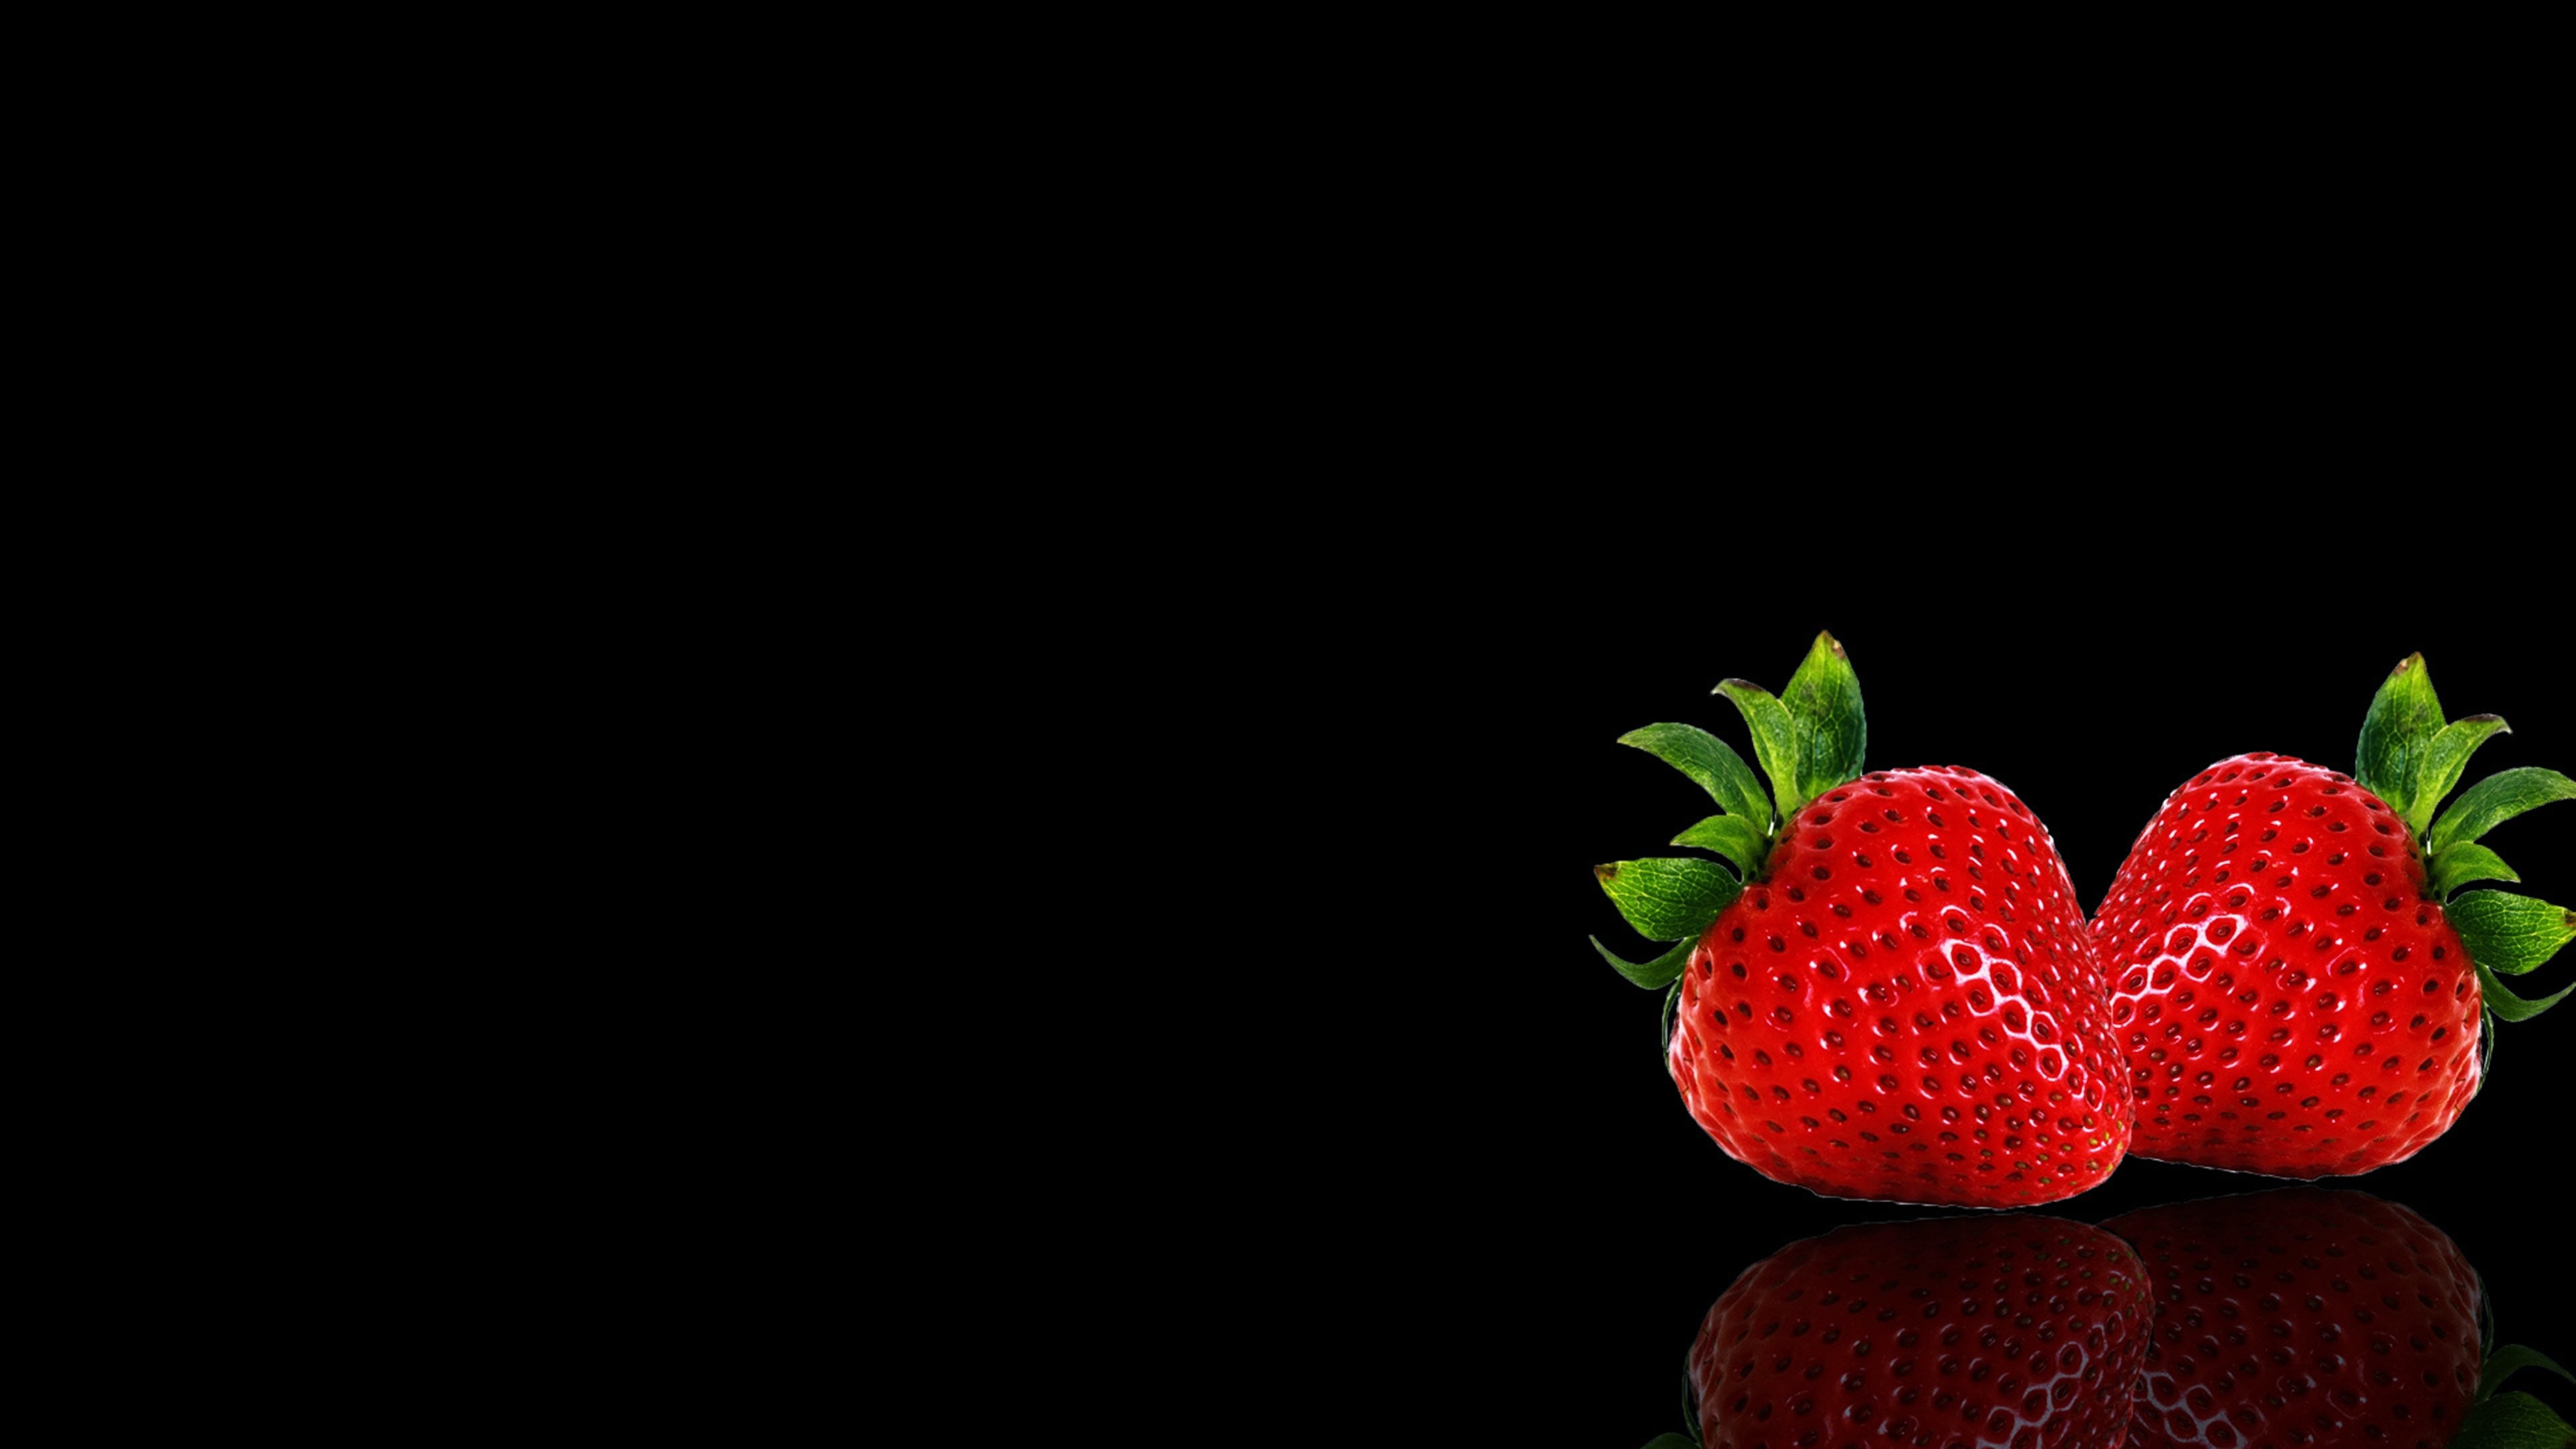 3840x2160, Apple Background Black Fruits Wallpapers - Strawberry - HD Wallpaper 